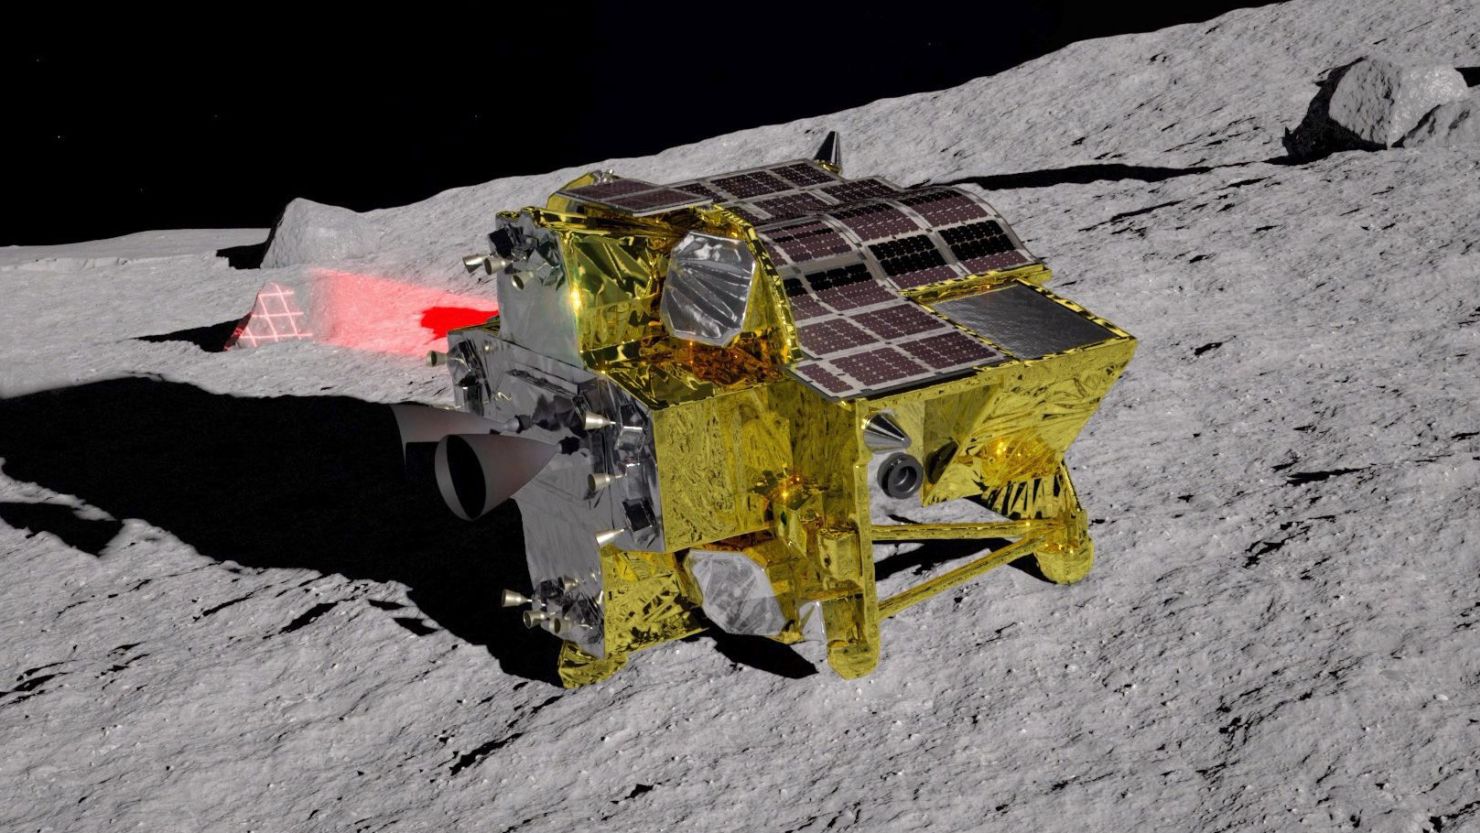 An artist's illustration depicts what the SLIM lander will look like on the lunar surface.